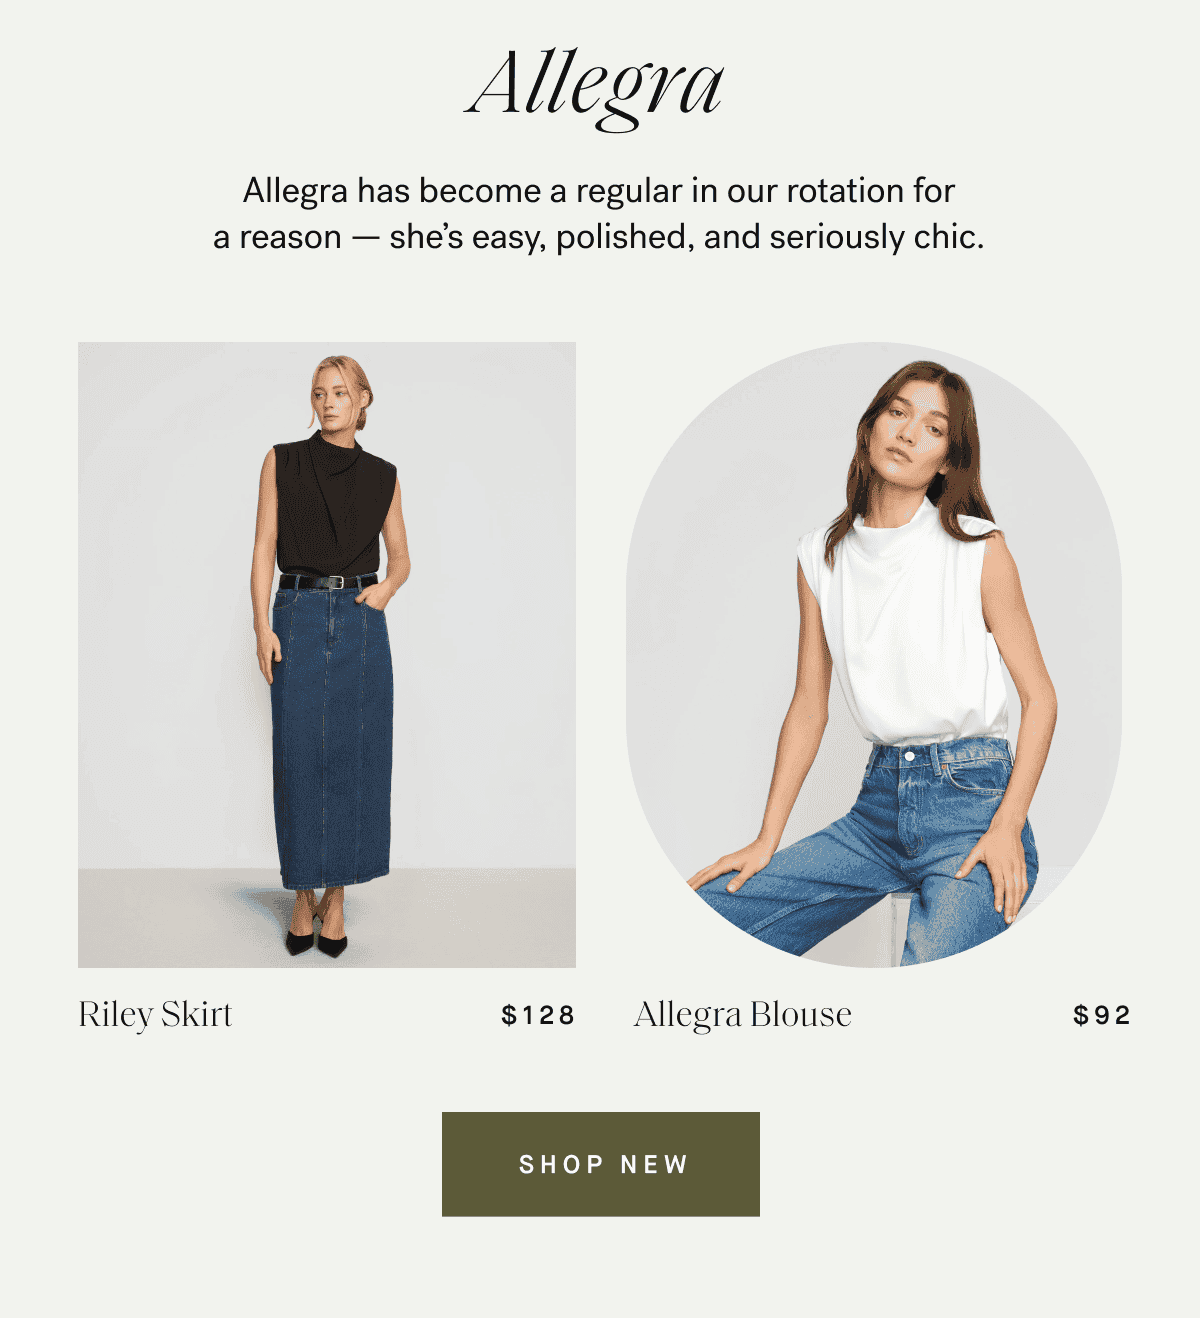 Allegra — Allegra has become a regular in our rotation for a reason — she's easy, polished, and seriously chic.